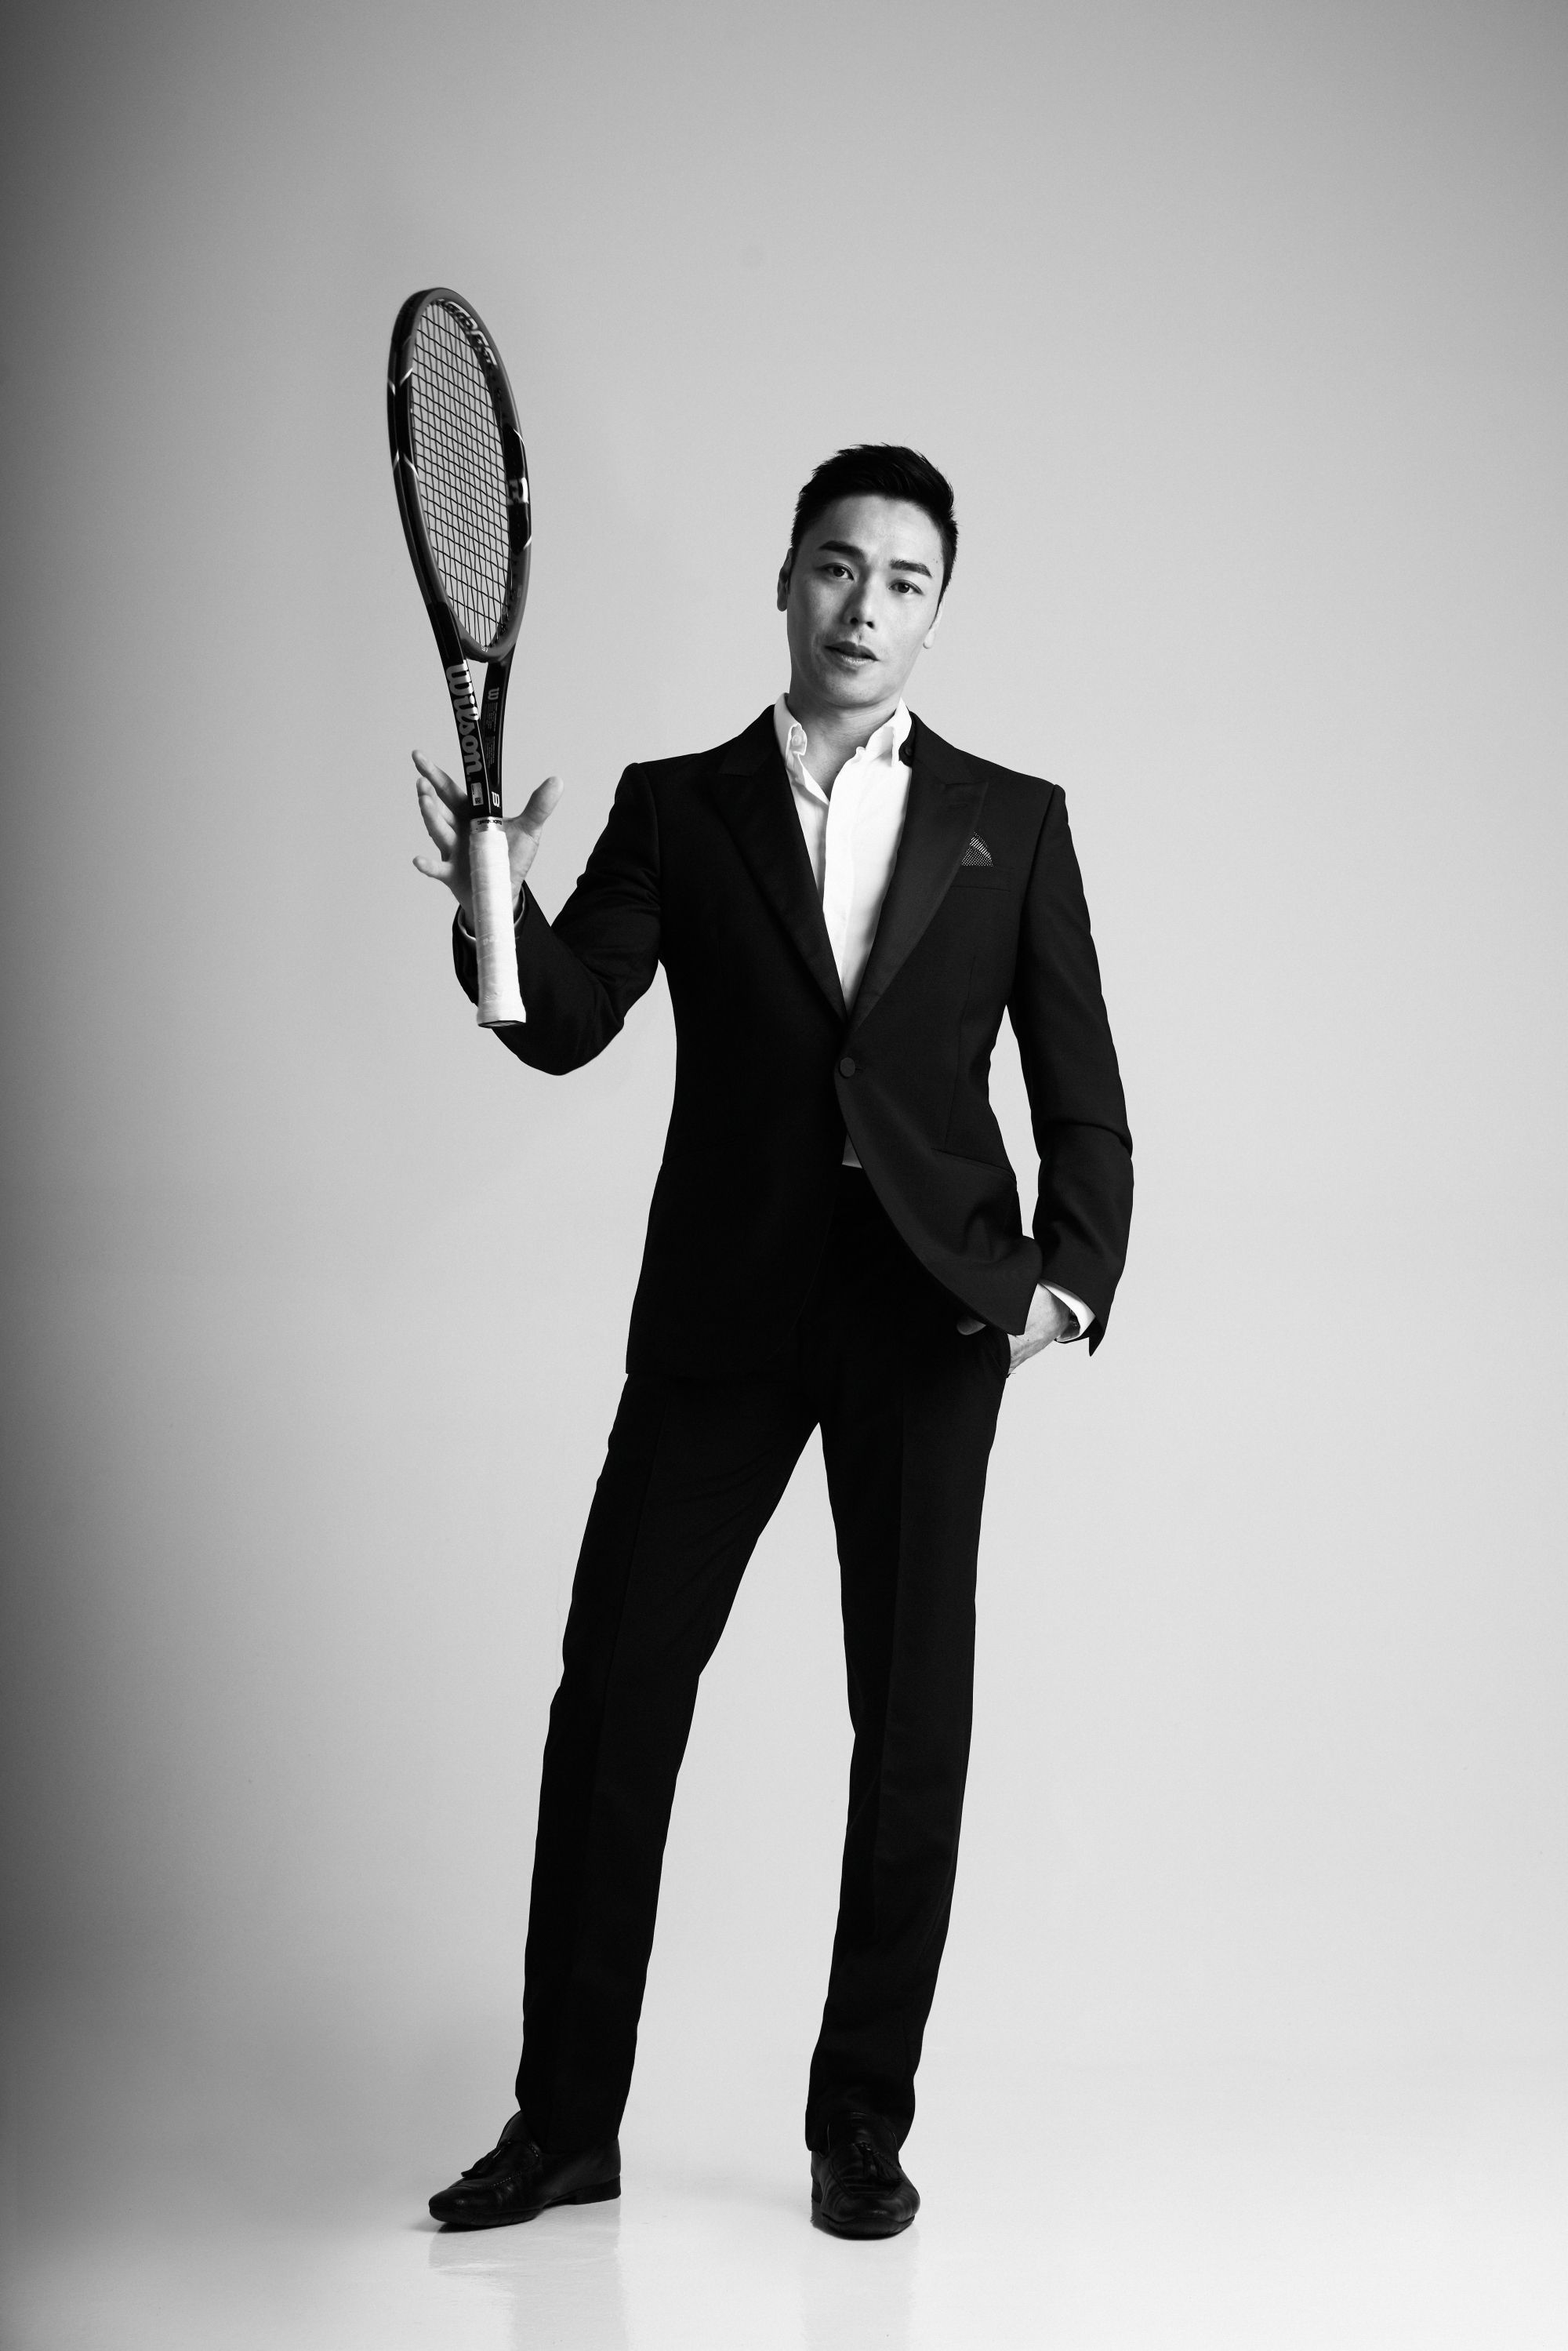 The Gentleman And His Game: Adrian Ong